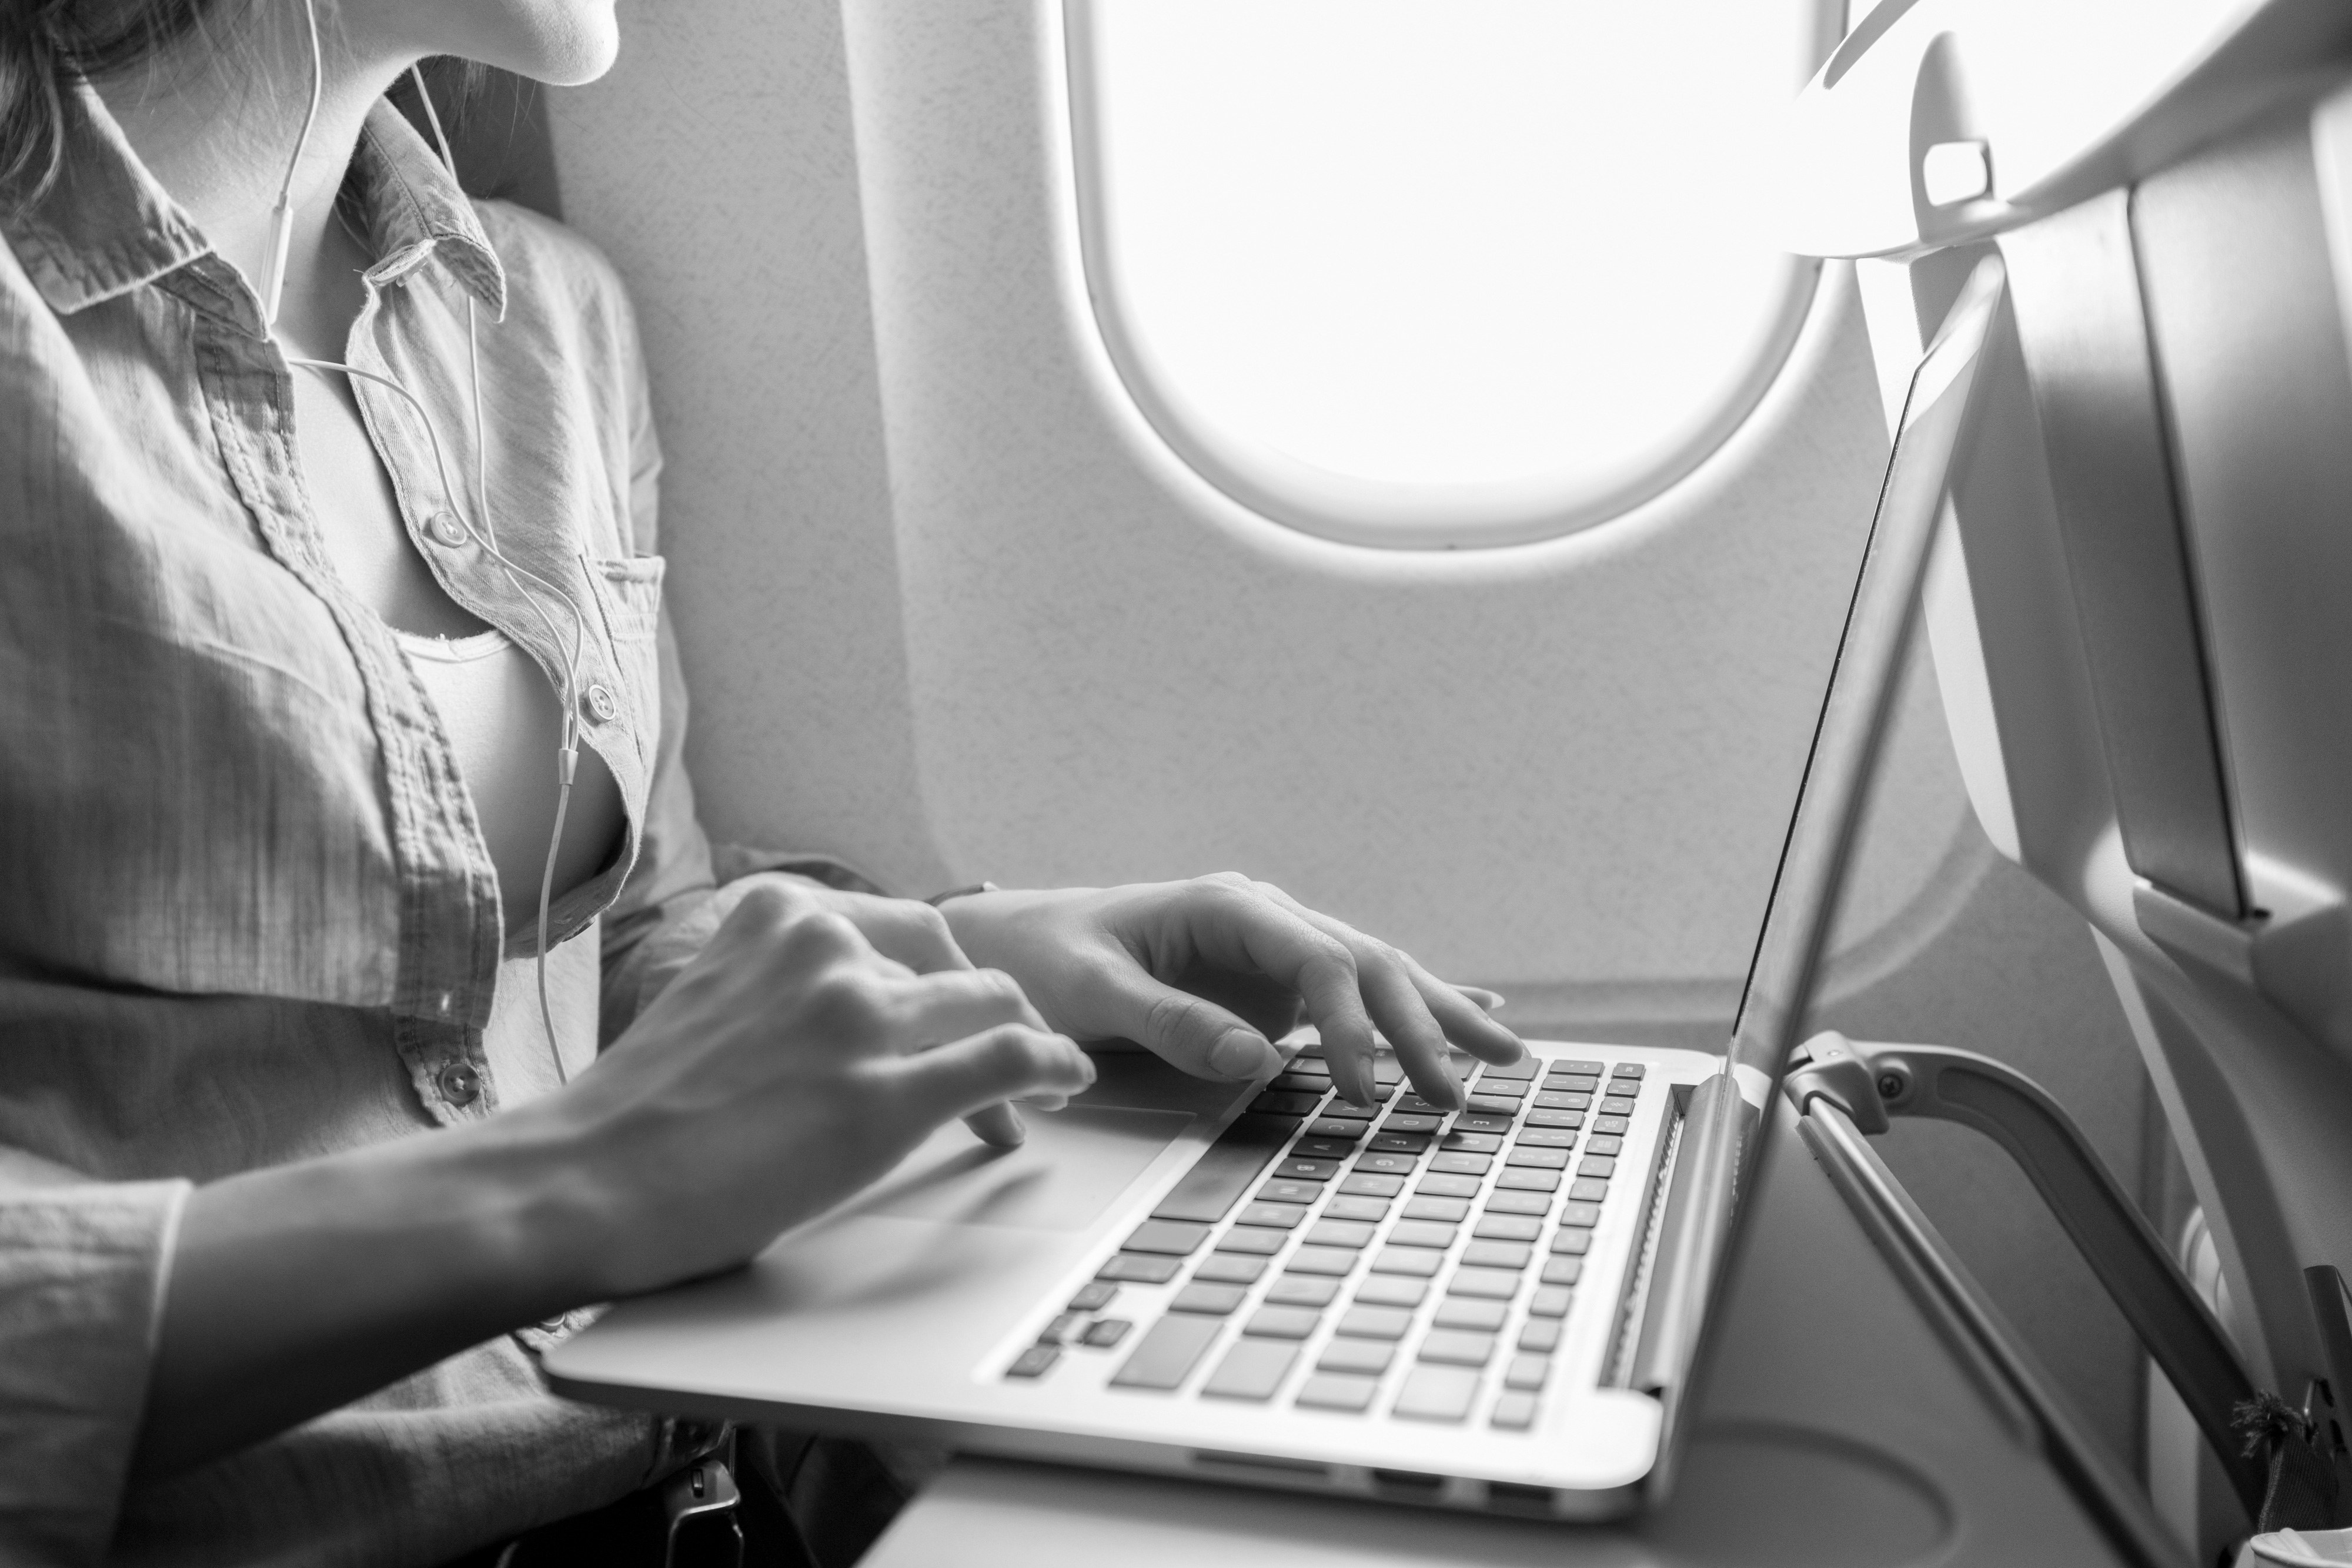 Faa Bans Macbook Pro Laptops With Recalled Batteries From Flights